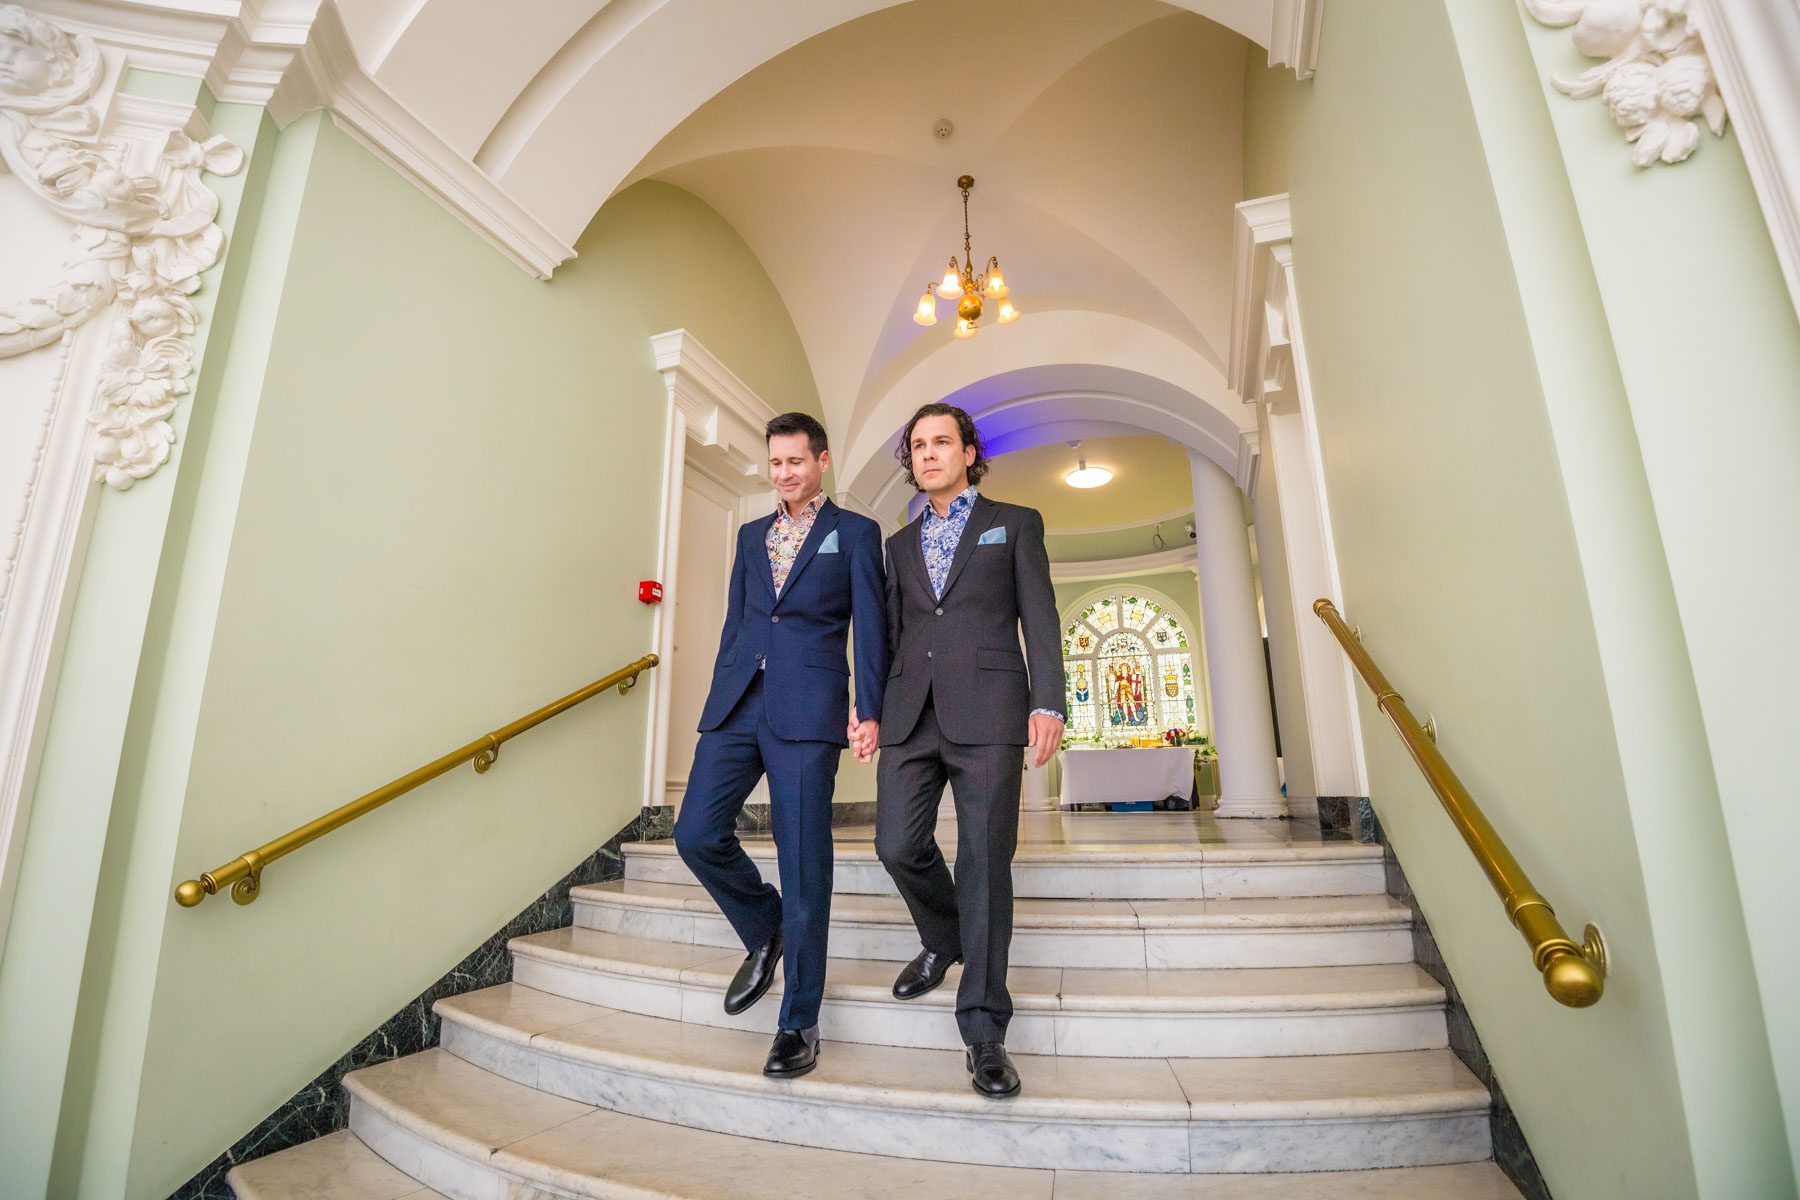 The grooms descend the staircase to their wedding ceremony in the Circular Hall at Lambeth Town Hall.